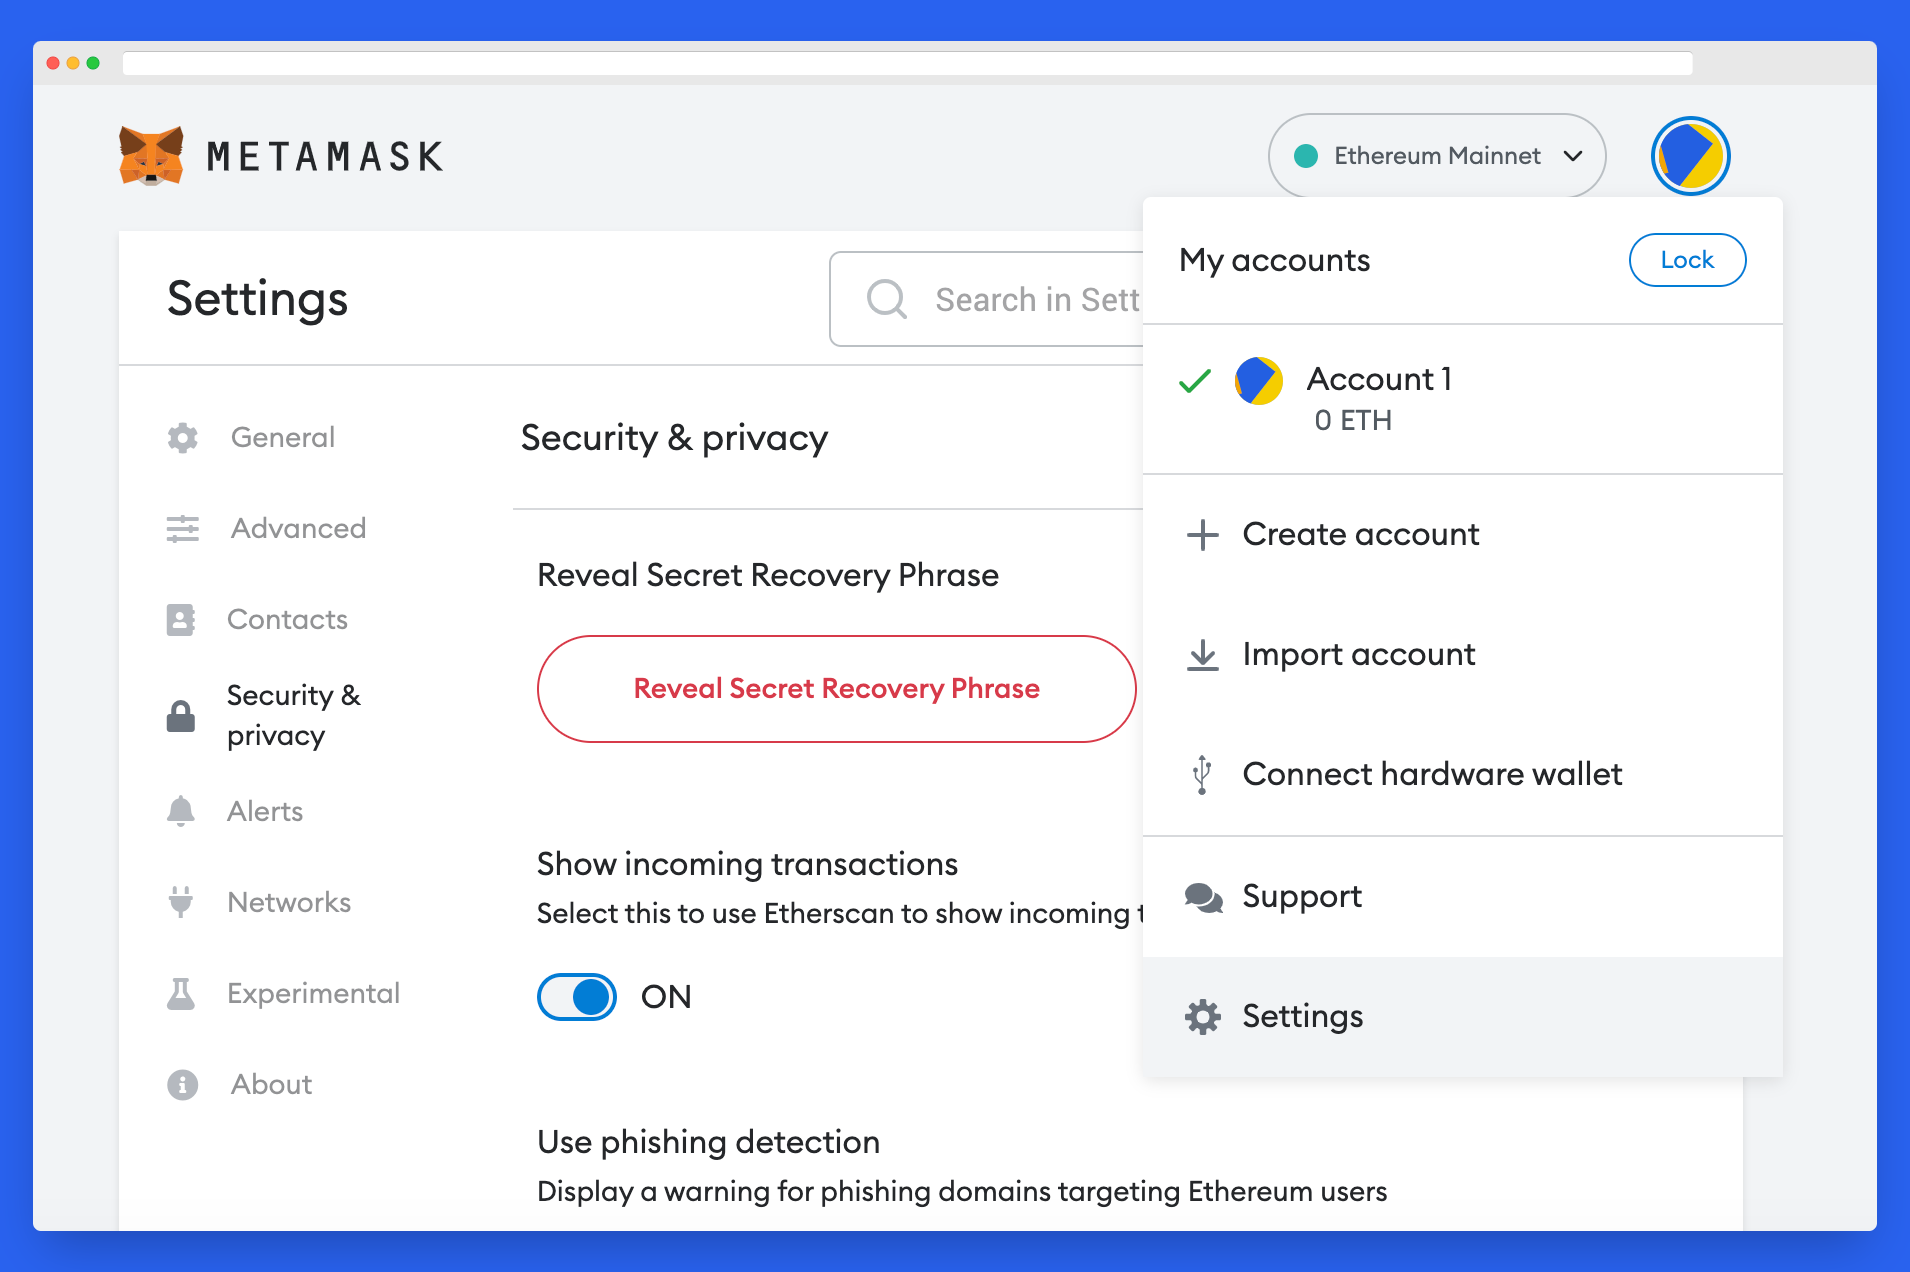 How to find secret recovery phrase in MetaMask